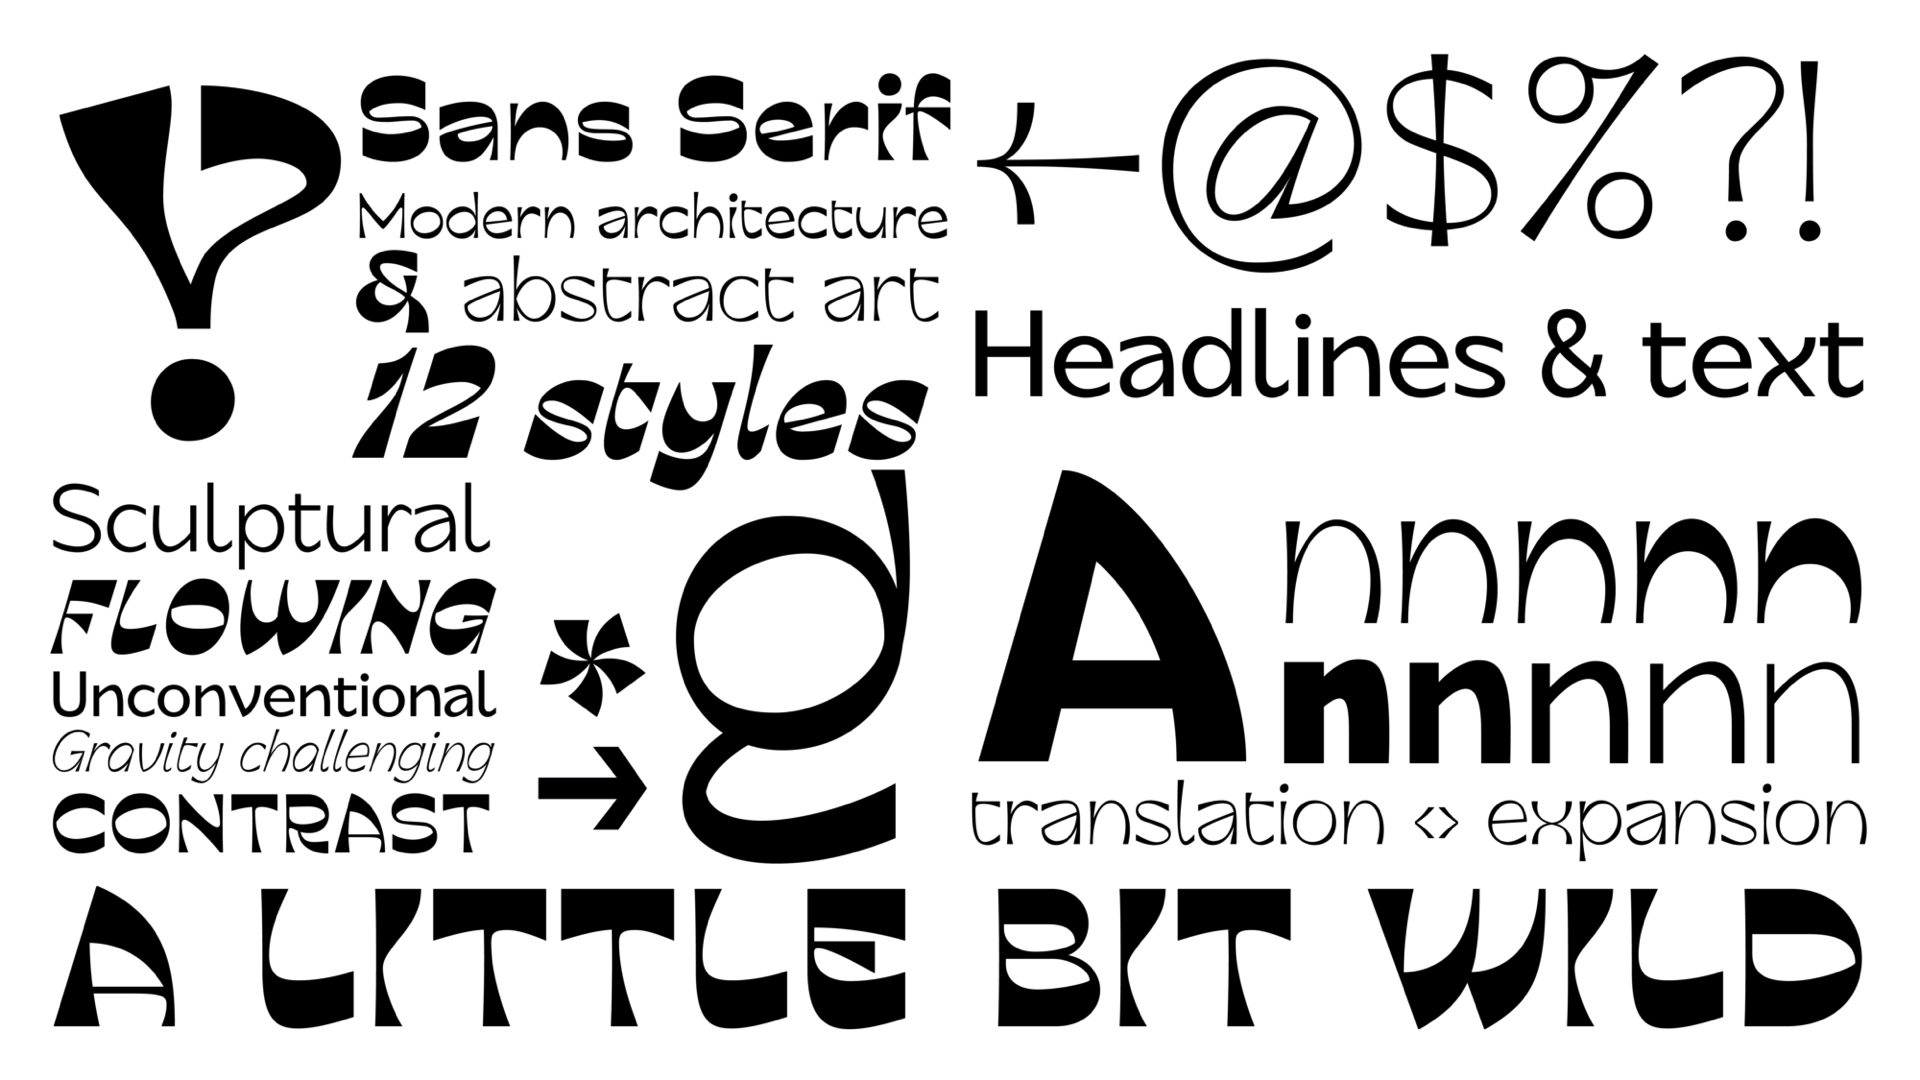 Mix of styles showcasing the typeface.